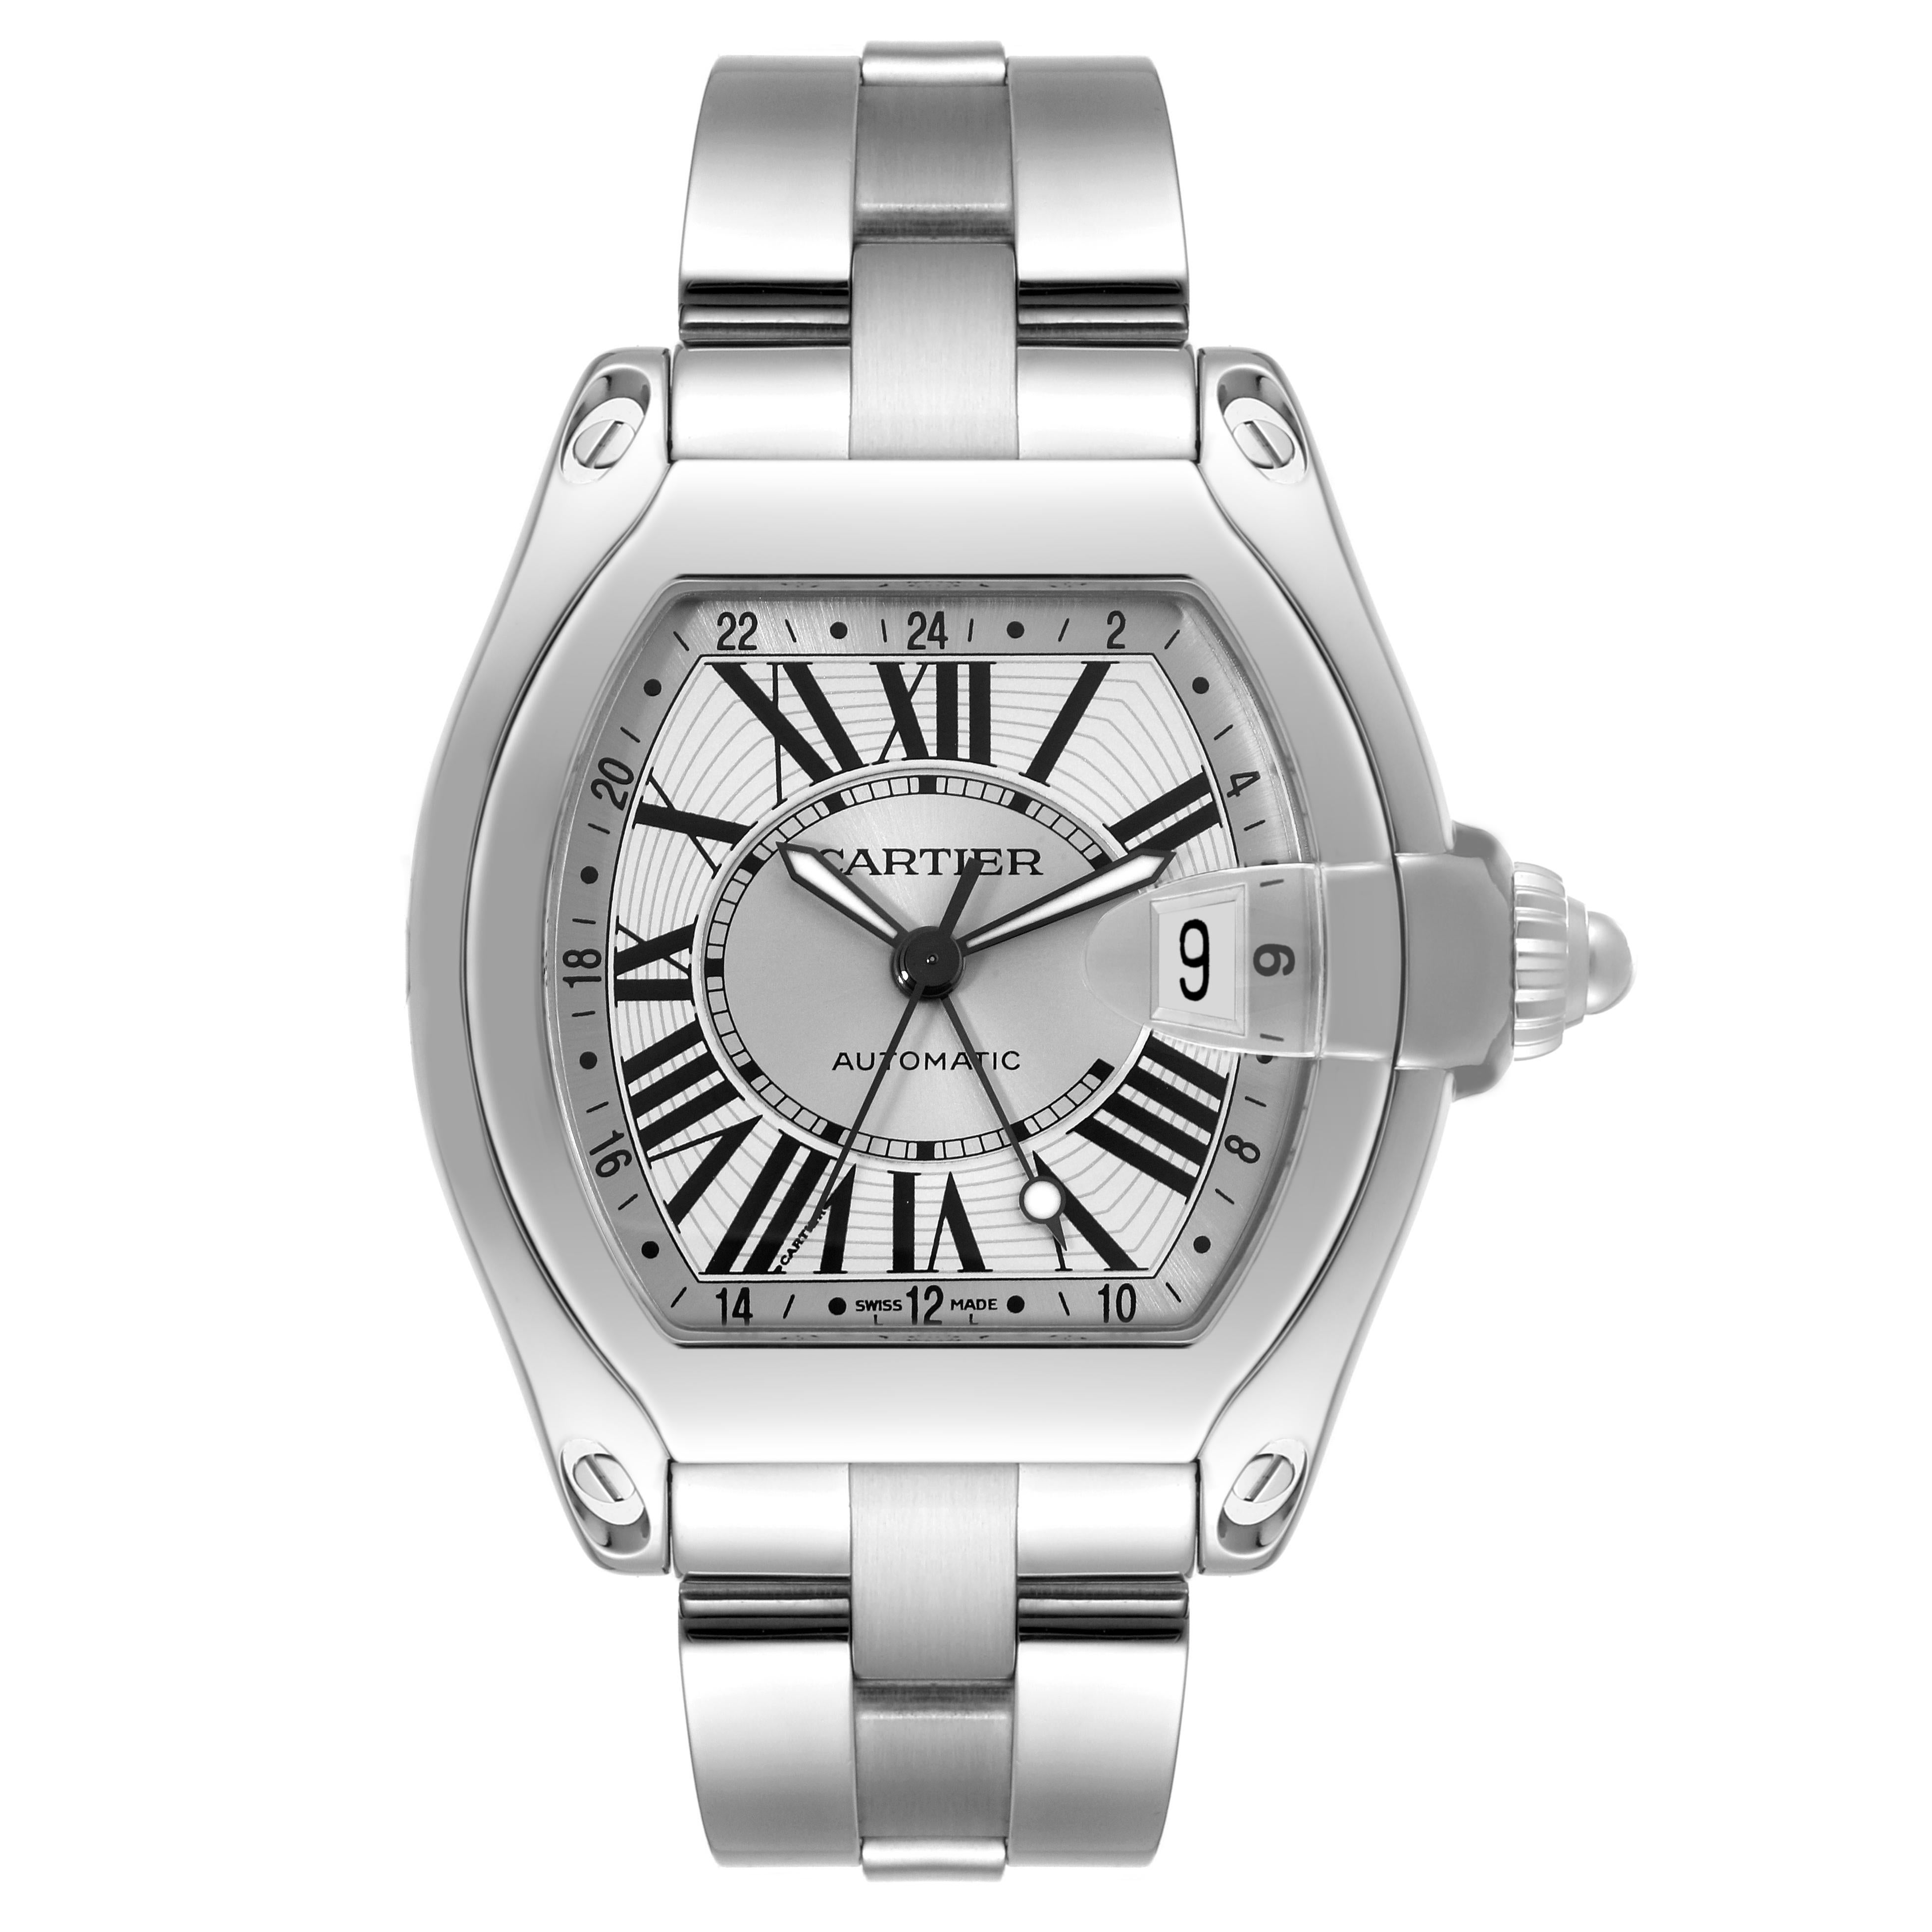 Cartier Roadster GMT Silver Dial Steel Mens Watch W62032X6. Automatic self-winding movement. Stainless steel tonneau shaped case 48 x 43 mm. . Scratch resistant sapphire crystal with cyclops magnifier. Silver sunray effect dial with black Roman